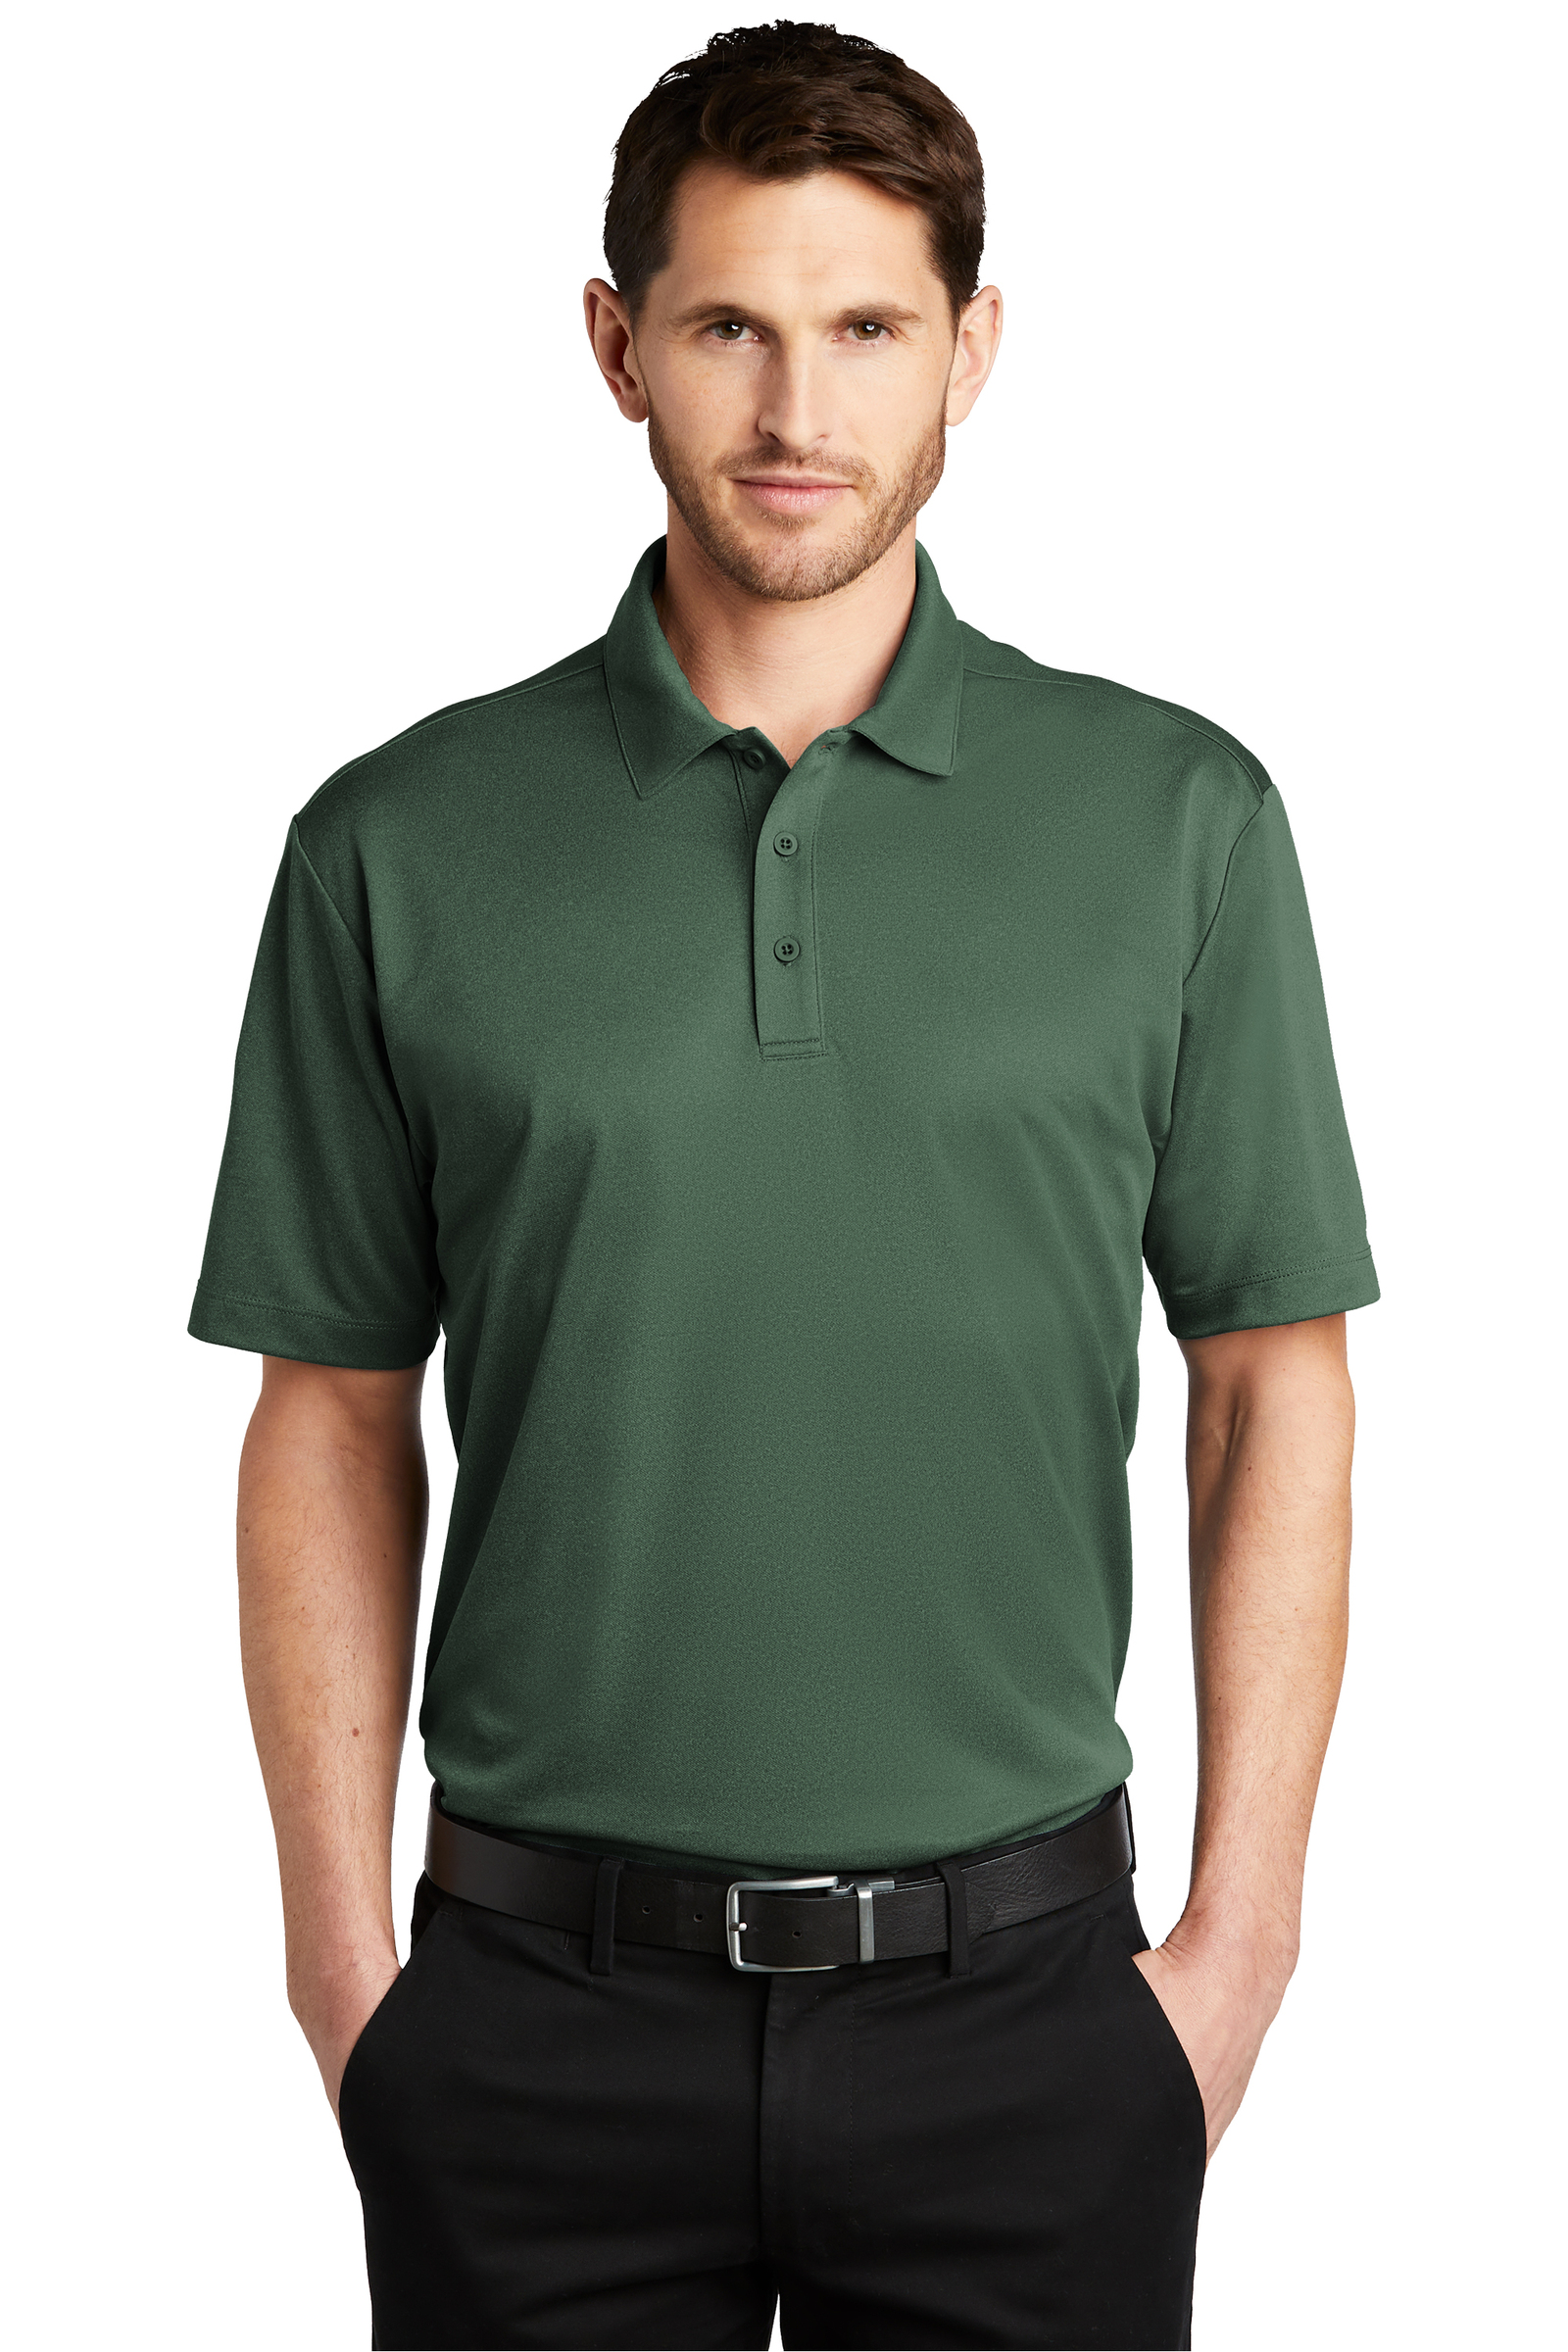 Port Authority Embroidered Men's Heathered Silk Touch Performance Polo